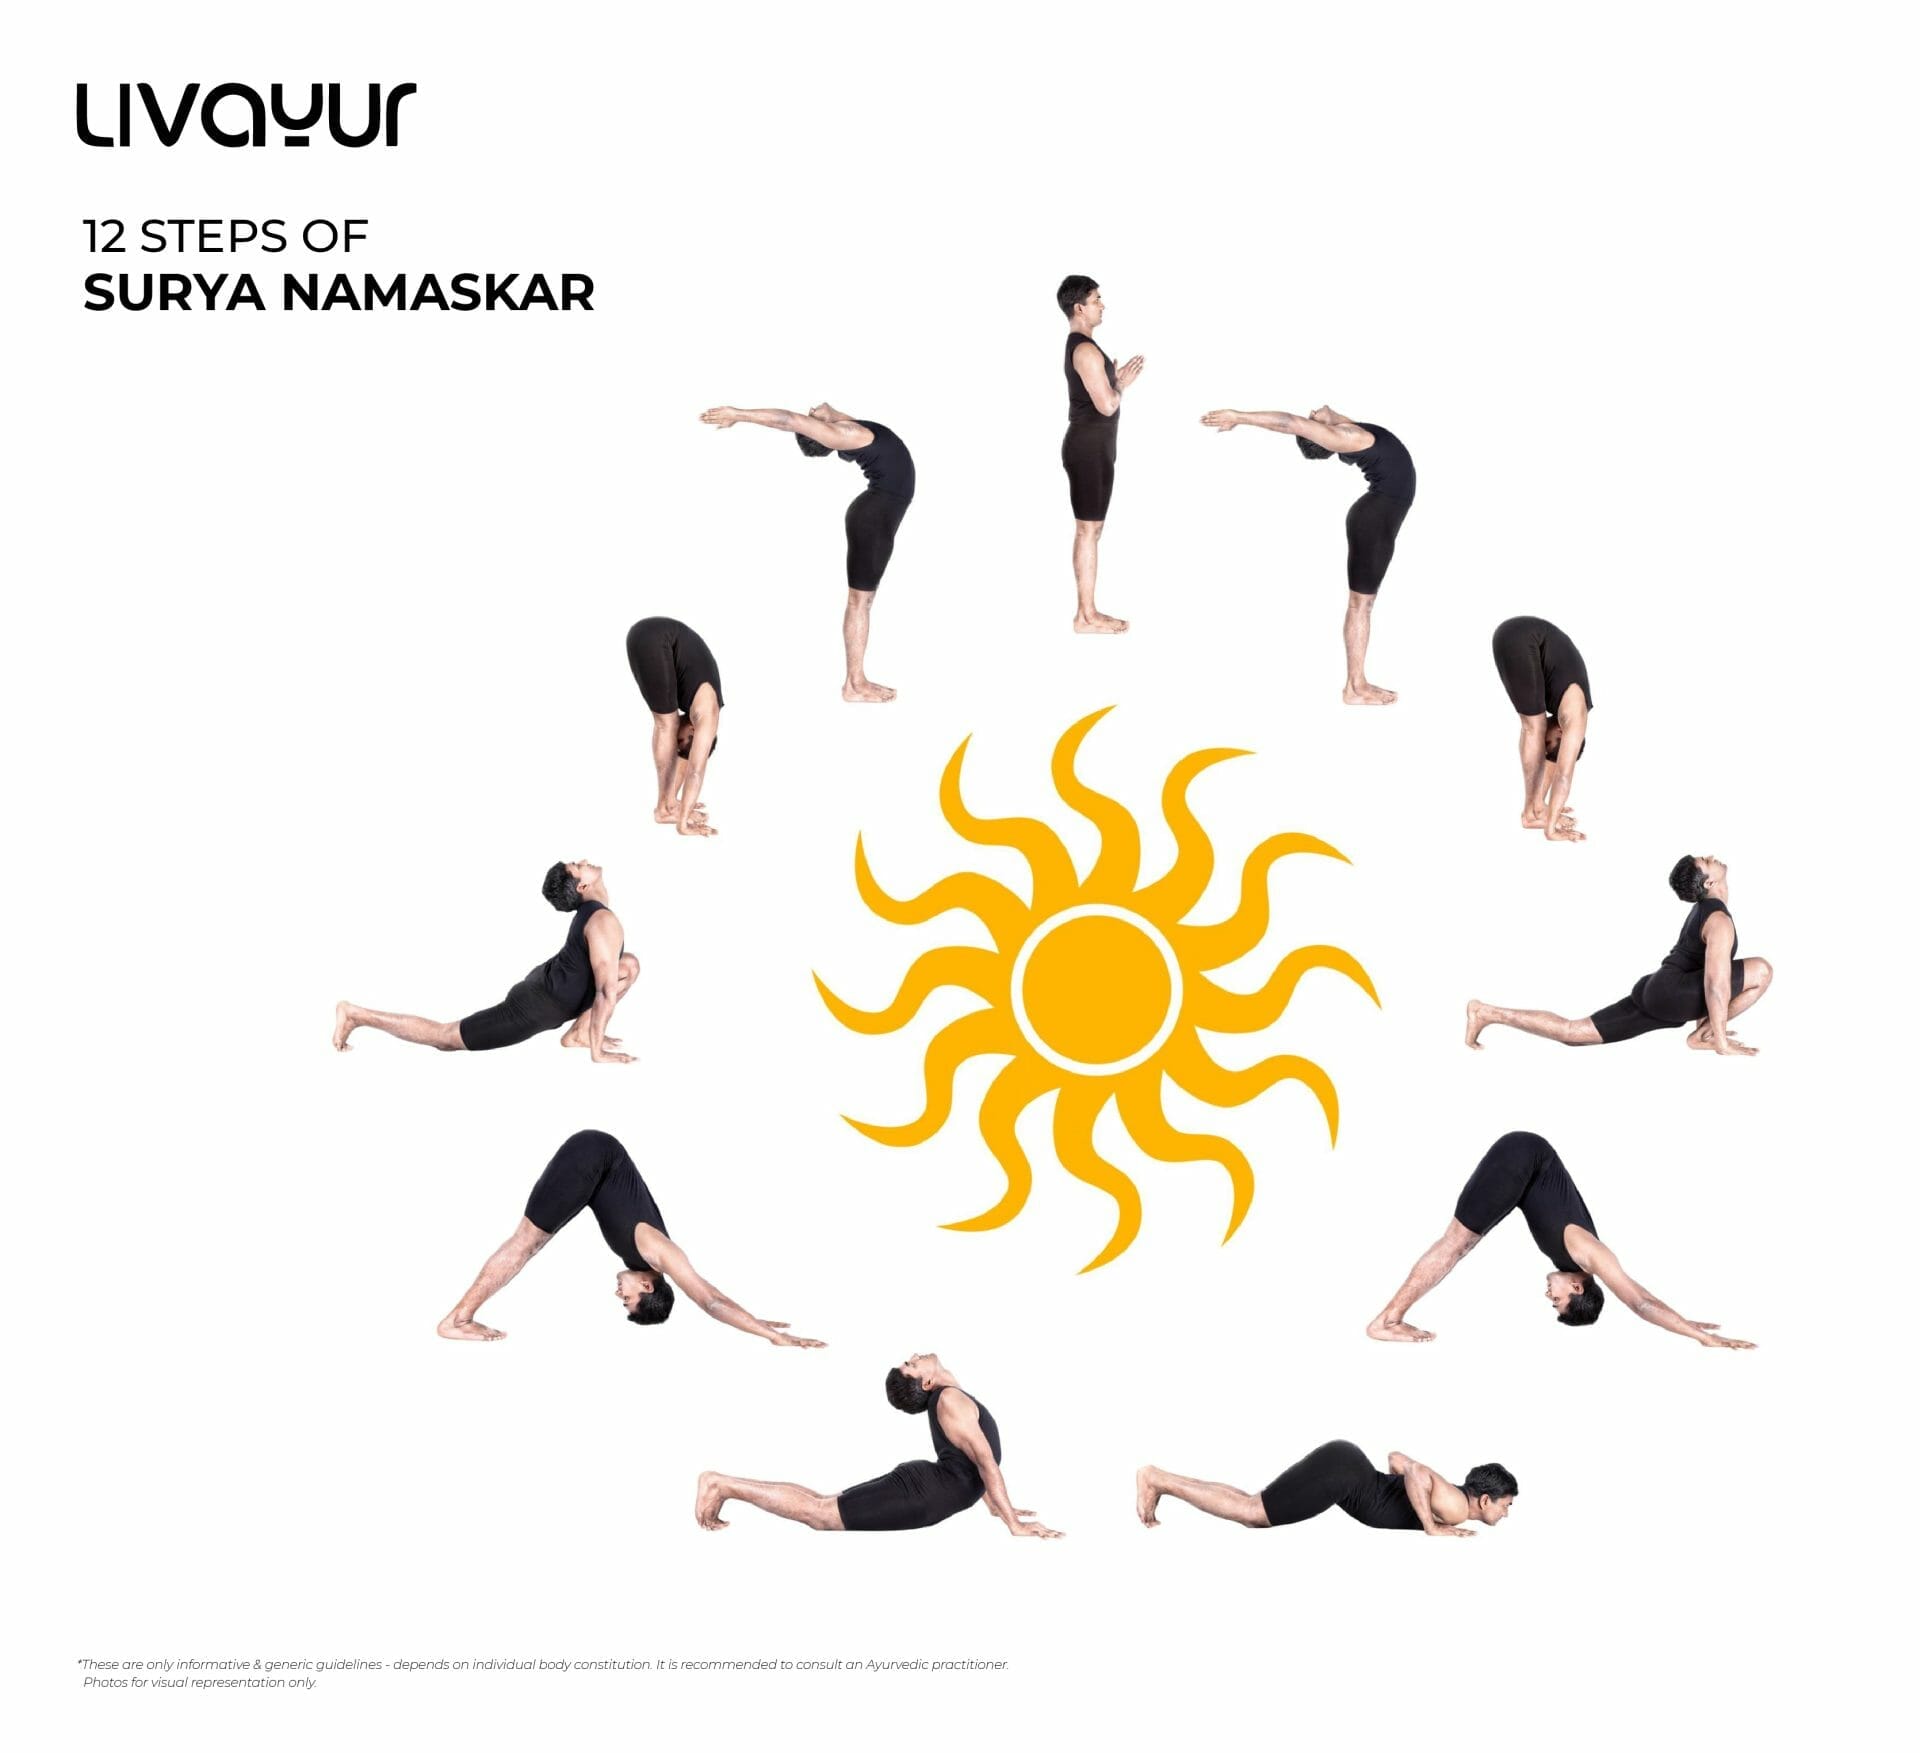 Surya Namaskar: How To Do Sun Salutation Perfectly With Step-By-Step  Instructions | TheHealthSite.com